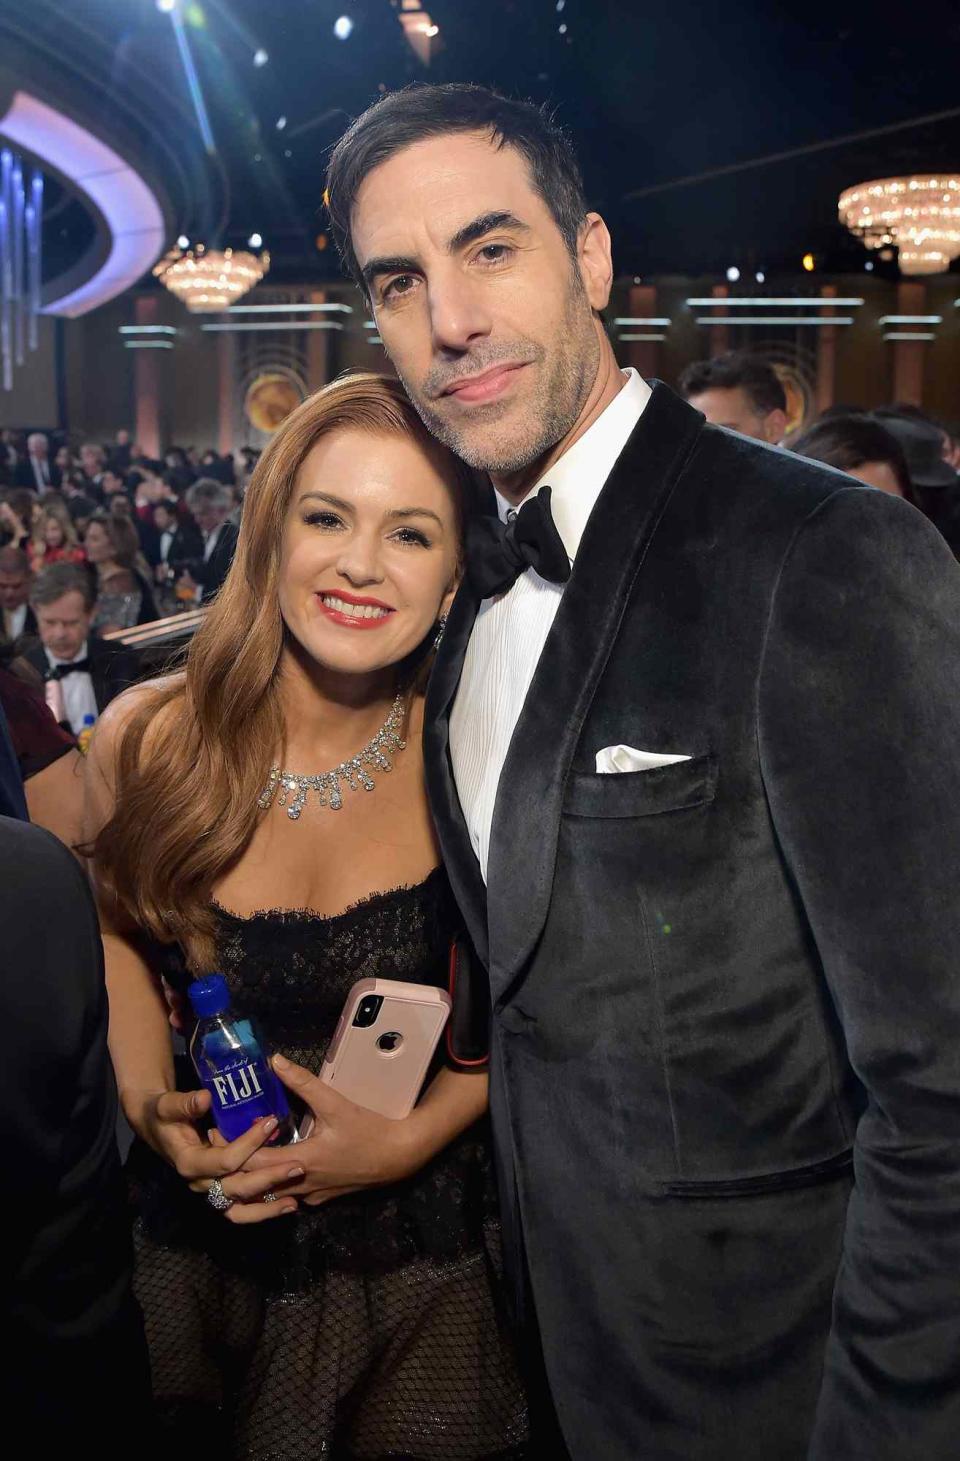 Isla Fisher (L) and Sacha Baron Cohen attend FIJI Water at the 76th Annual Golden Globe Awards on January 6, 2019 at the Beverly Hilton in Los Angeles, California